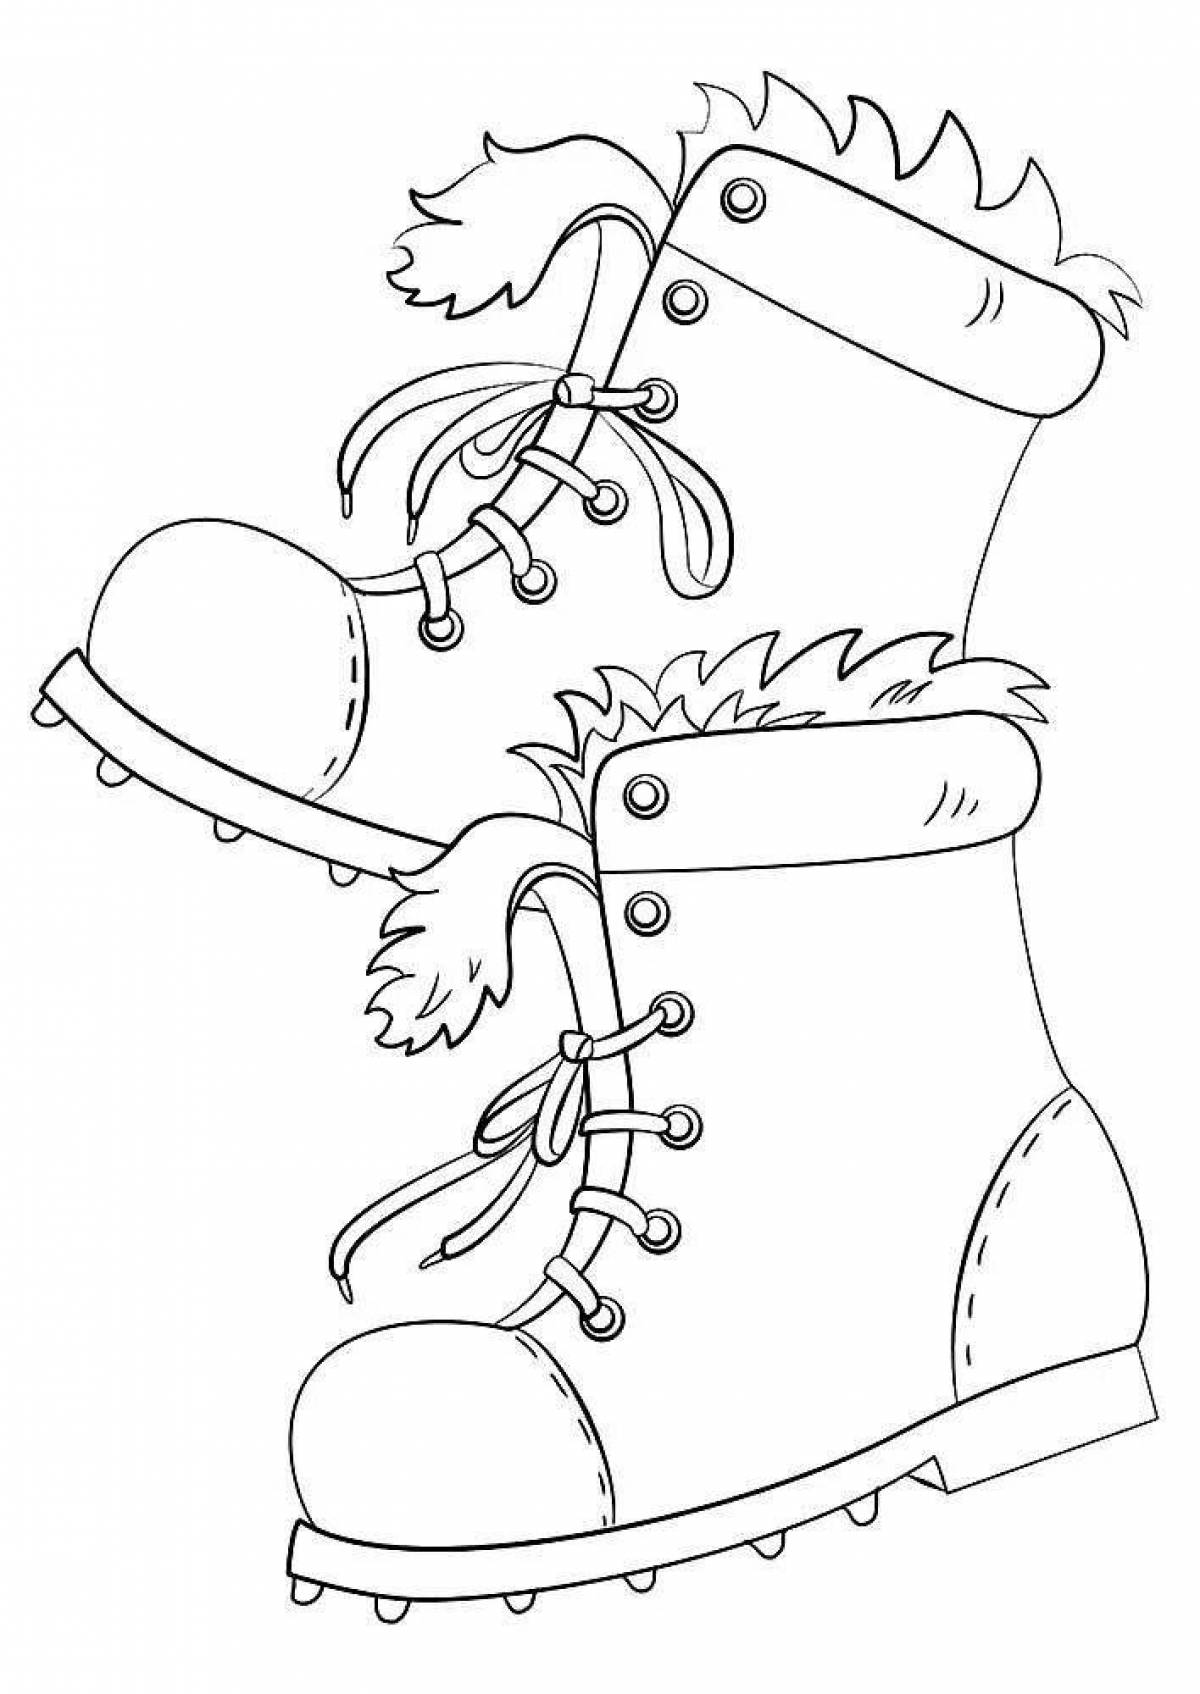 Coloring book funny boots